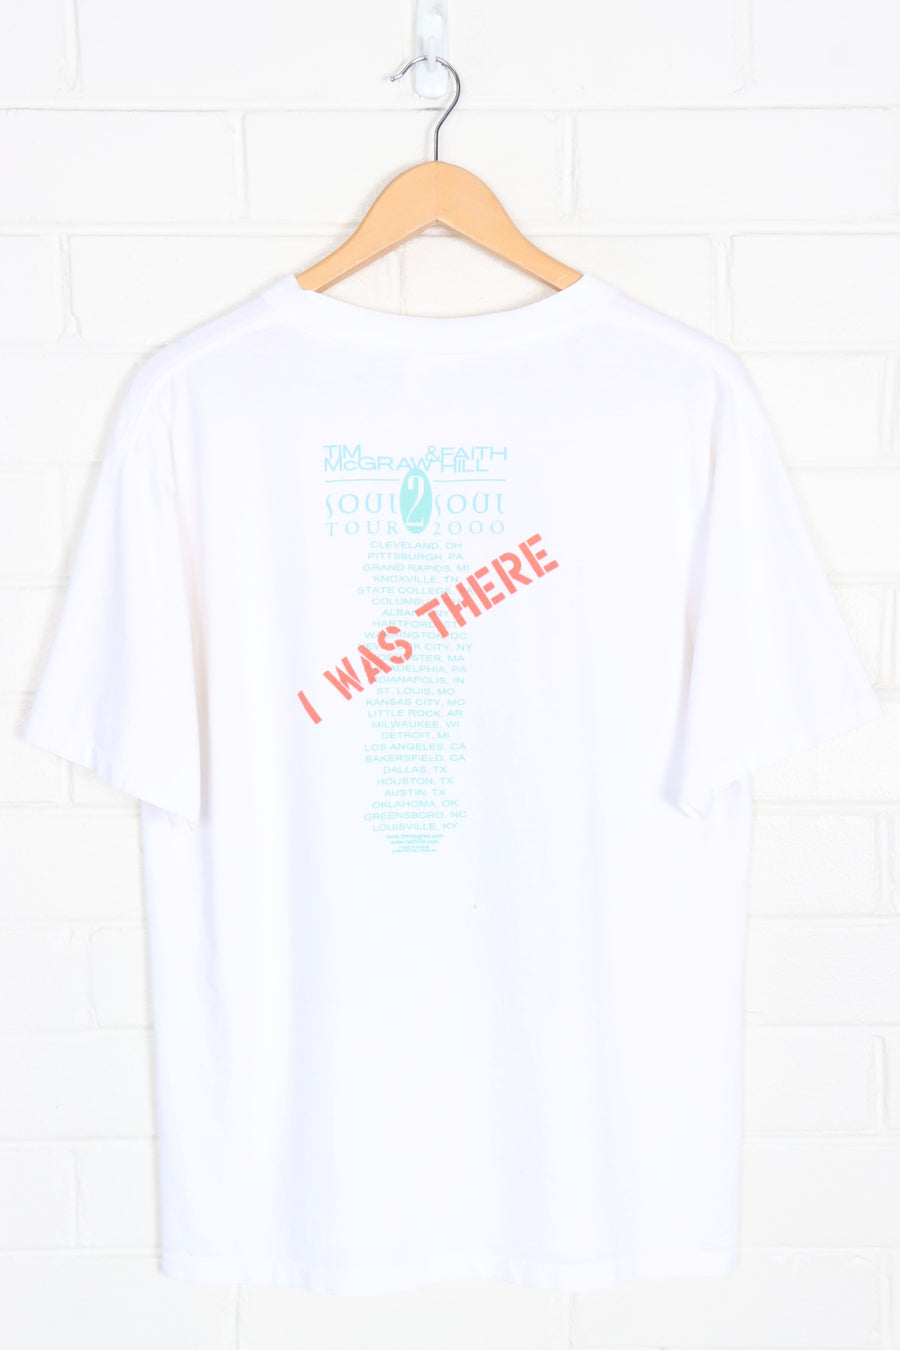 Tim McGraw & Faith Hill 'I Was There!' Tour Band Merch T-Shirt (M-L)